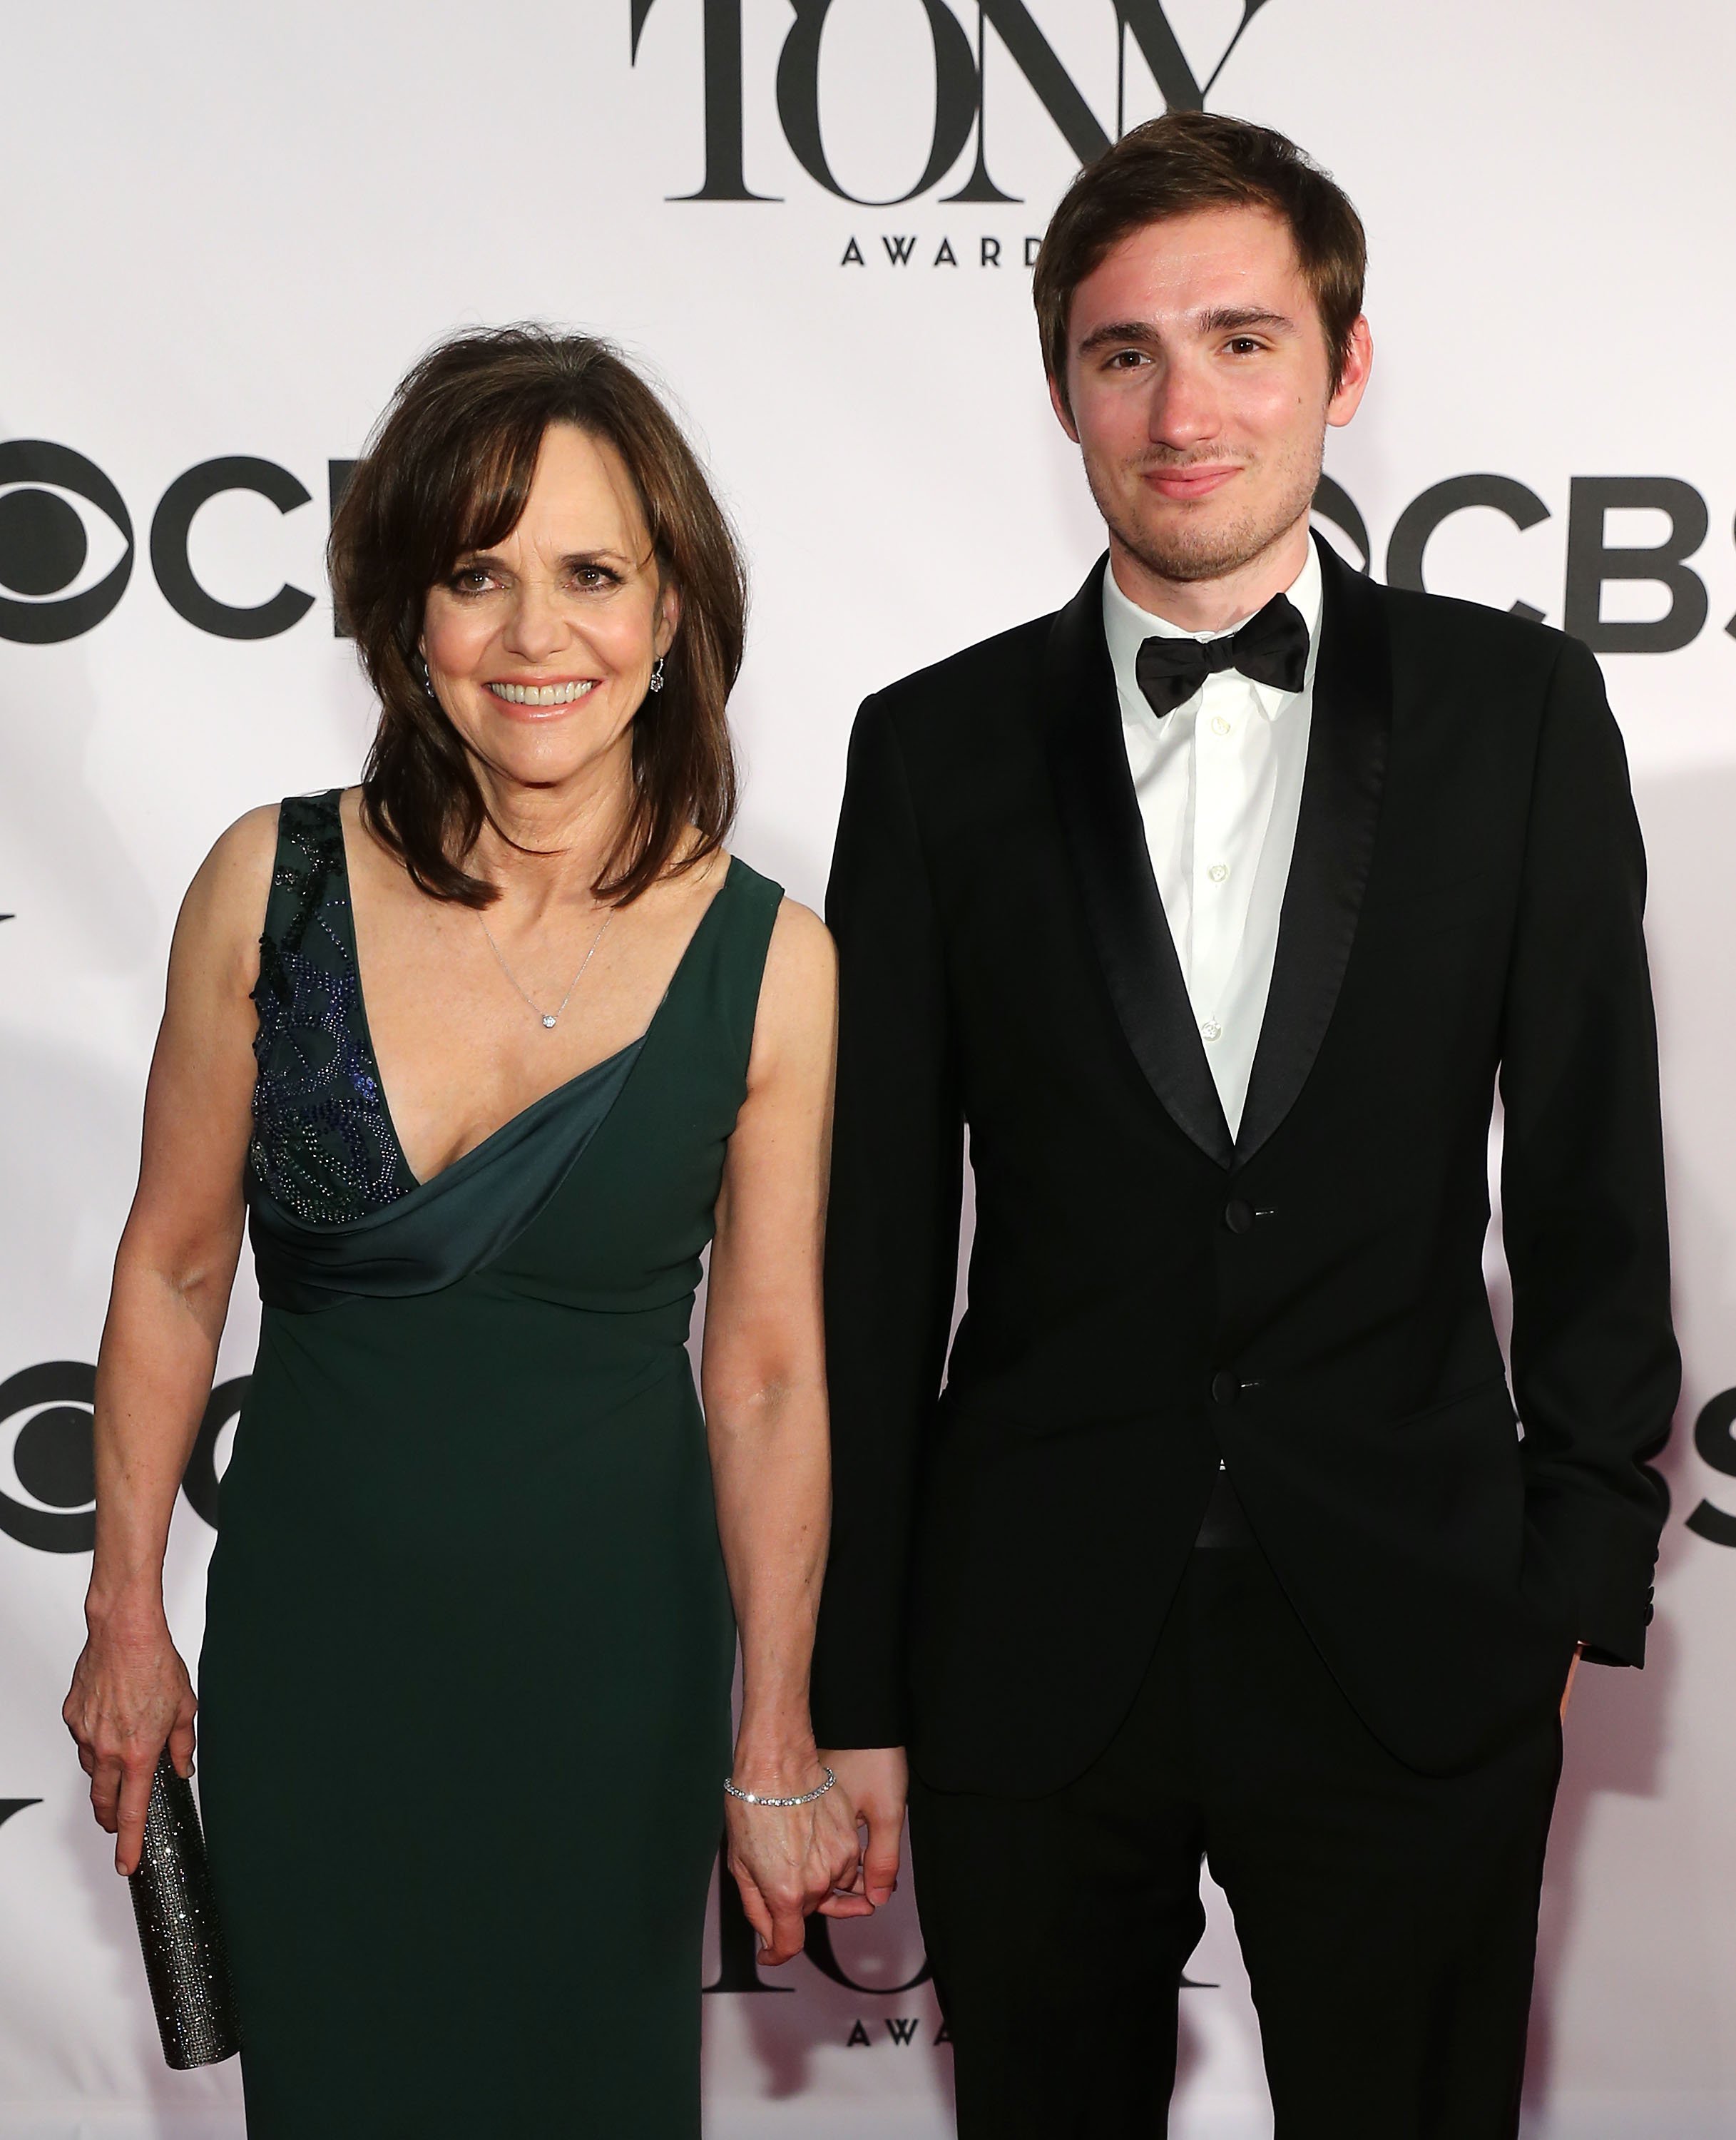 Sally Field and her son Samuel Greisman attend the 67th Annual Tony Awards at Radio City Music Hall on June 9, 2013 in New York City.  |  Source: Getty Images